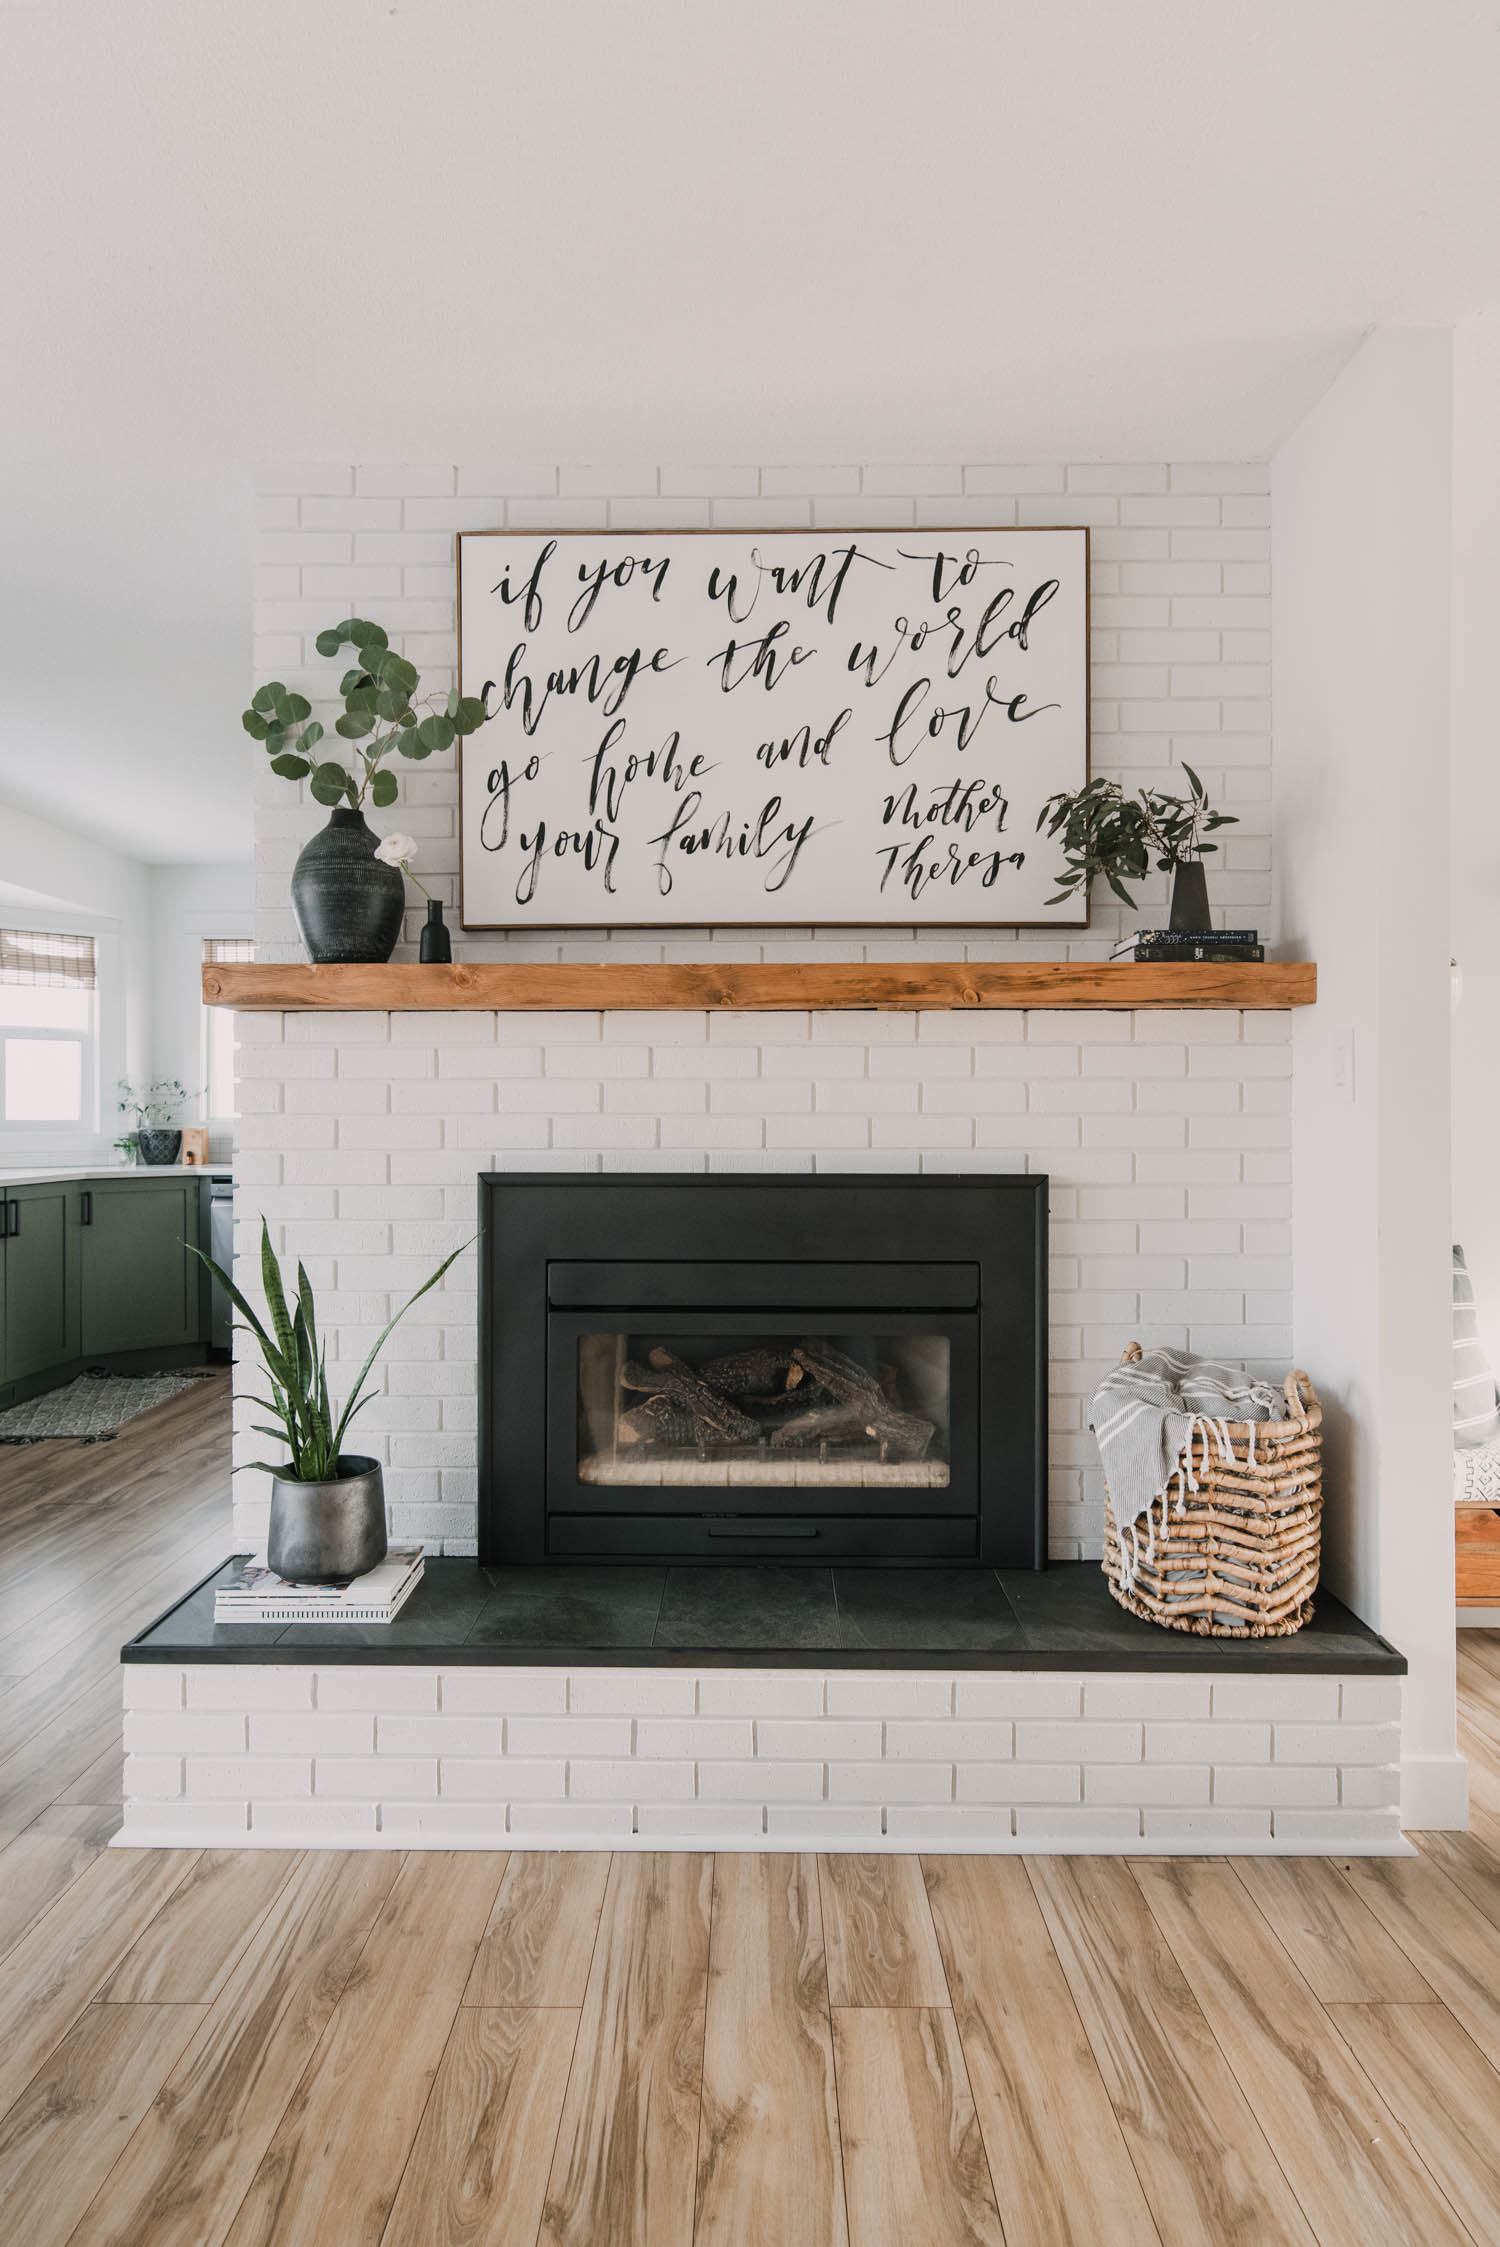 Painted brick fireplace with rustic wood mantel and tile hearth